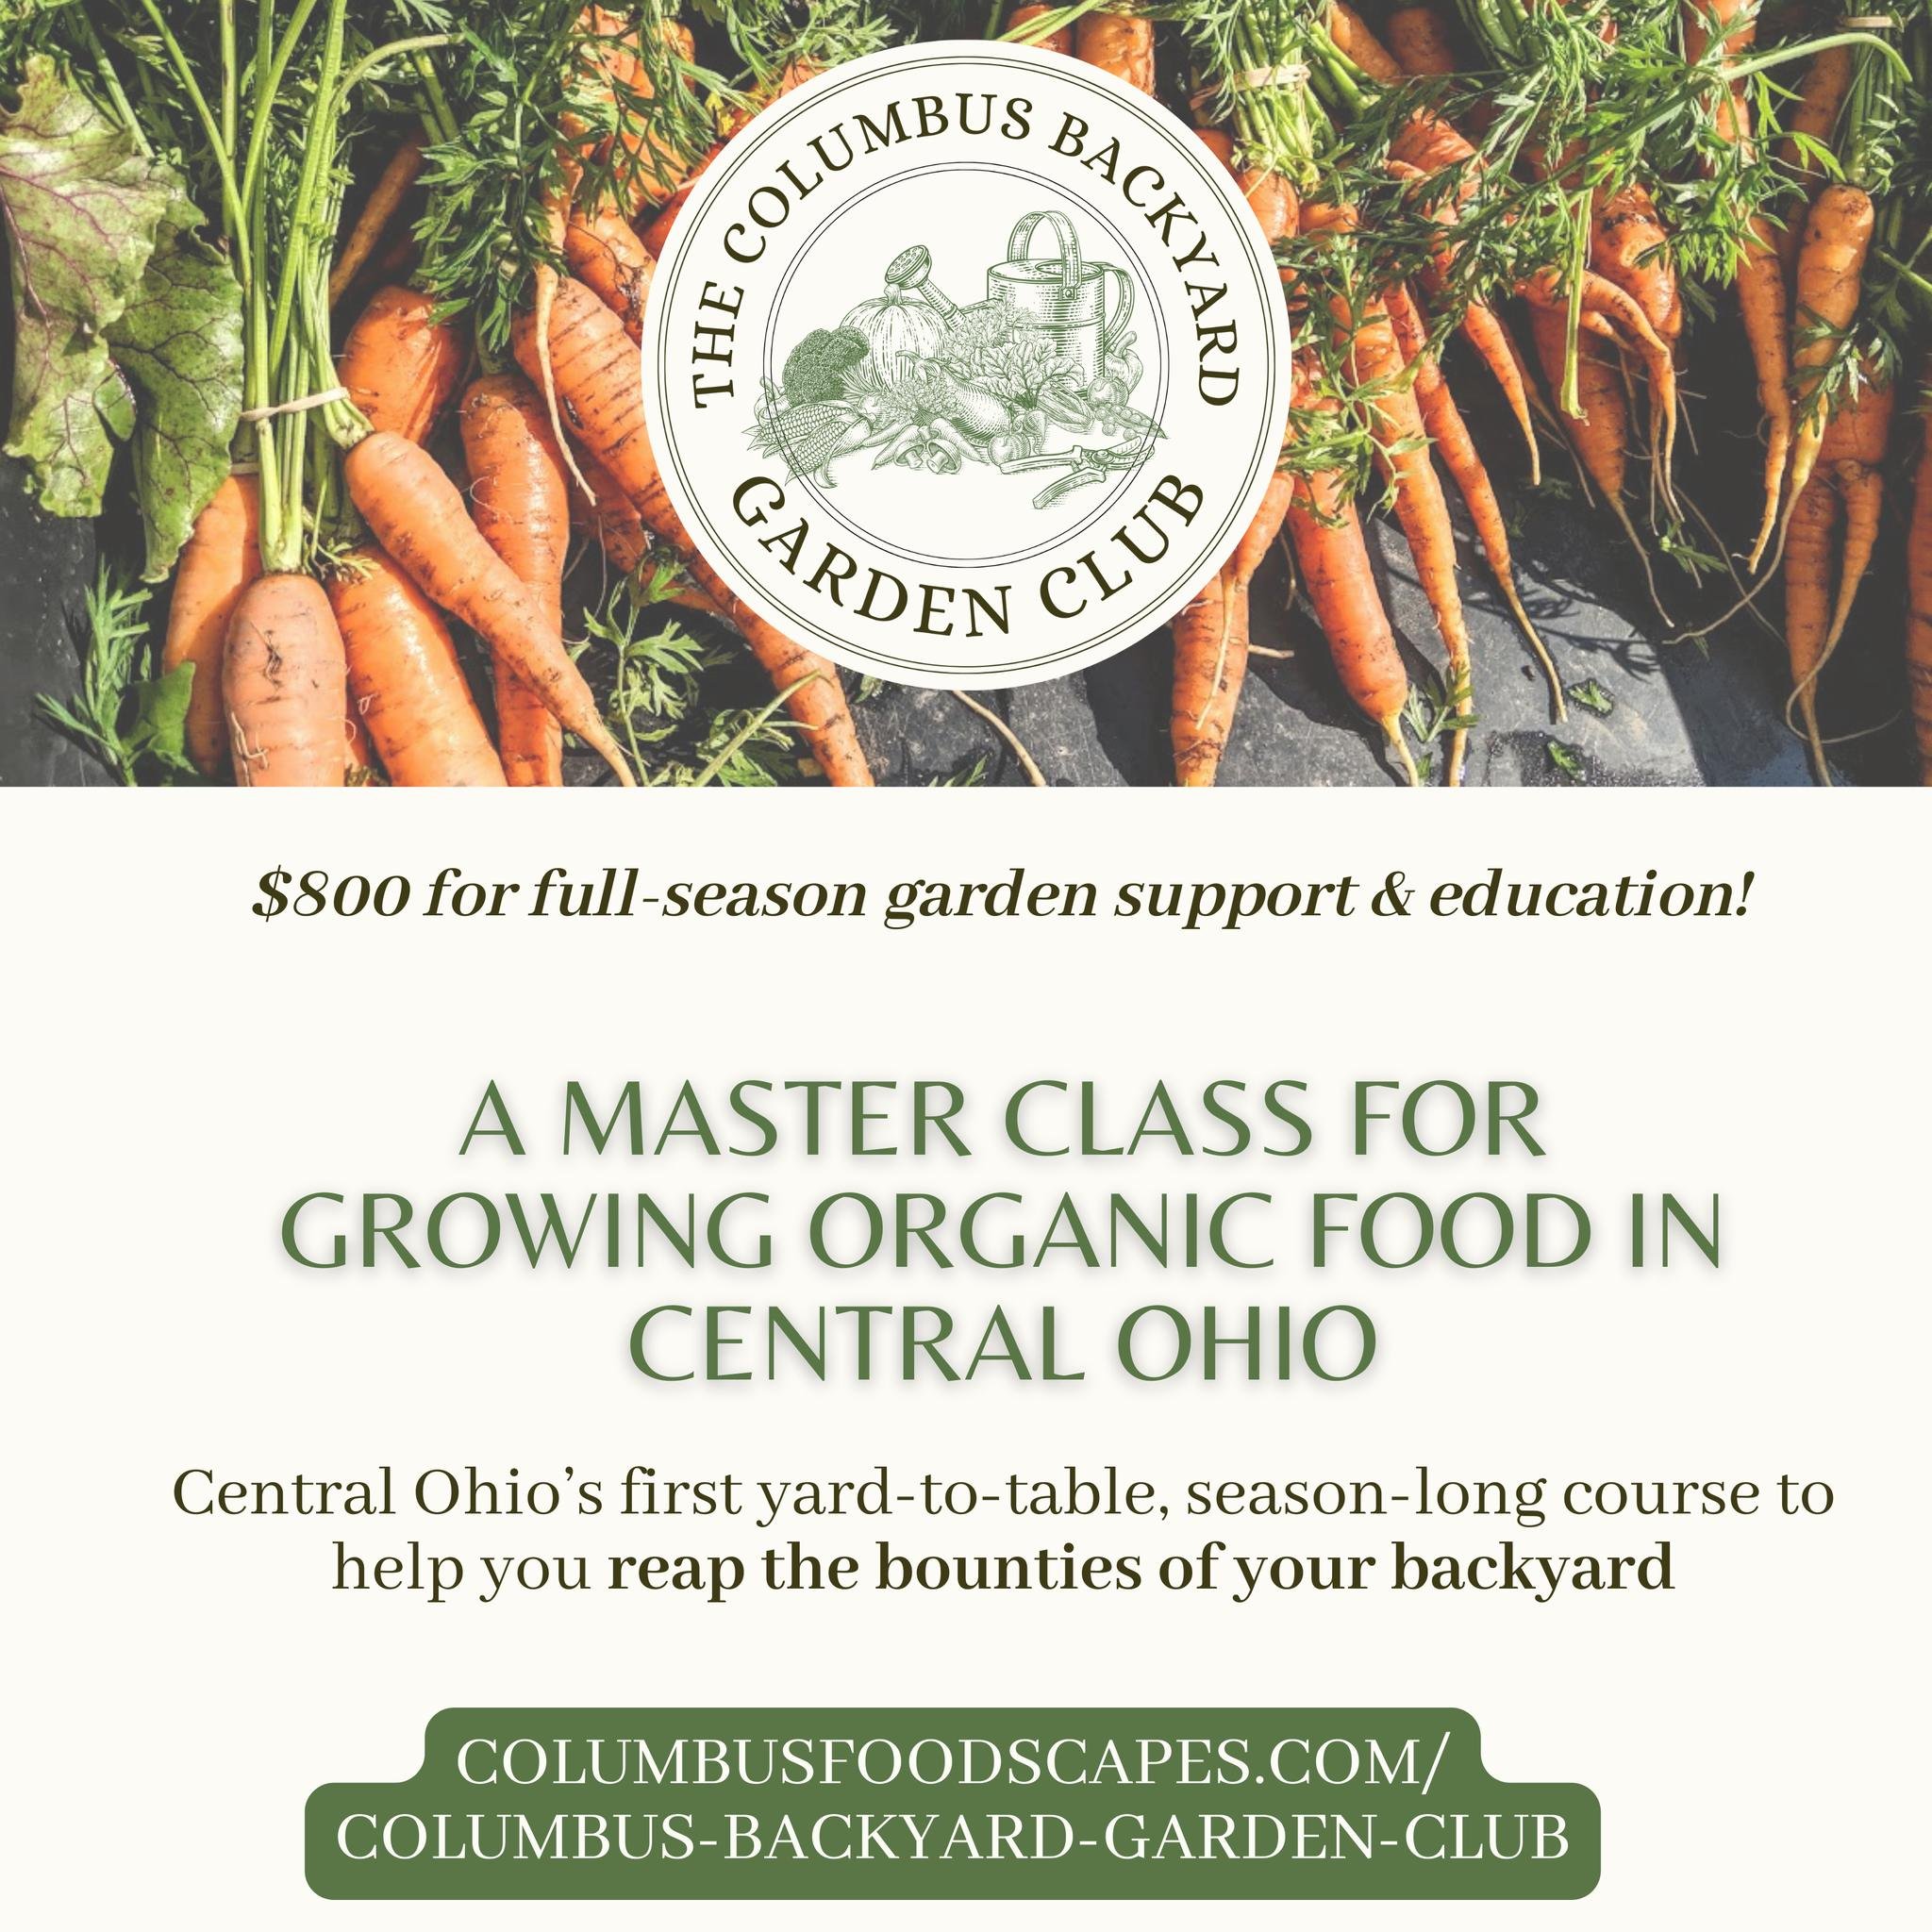 Just a head's up: only 5 MORE DAYS to sign-up for the Columbus Backyard Garden Club! Comment &quot;Grow food&quot; and I'll send ya the link for more info &amp; to register!

The Columbus Backyard Garden Club is the course and community I wish I had 